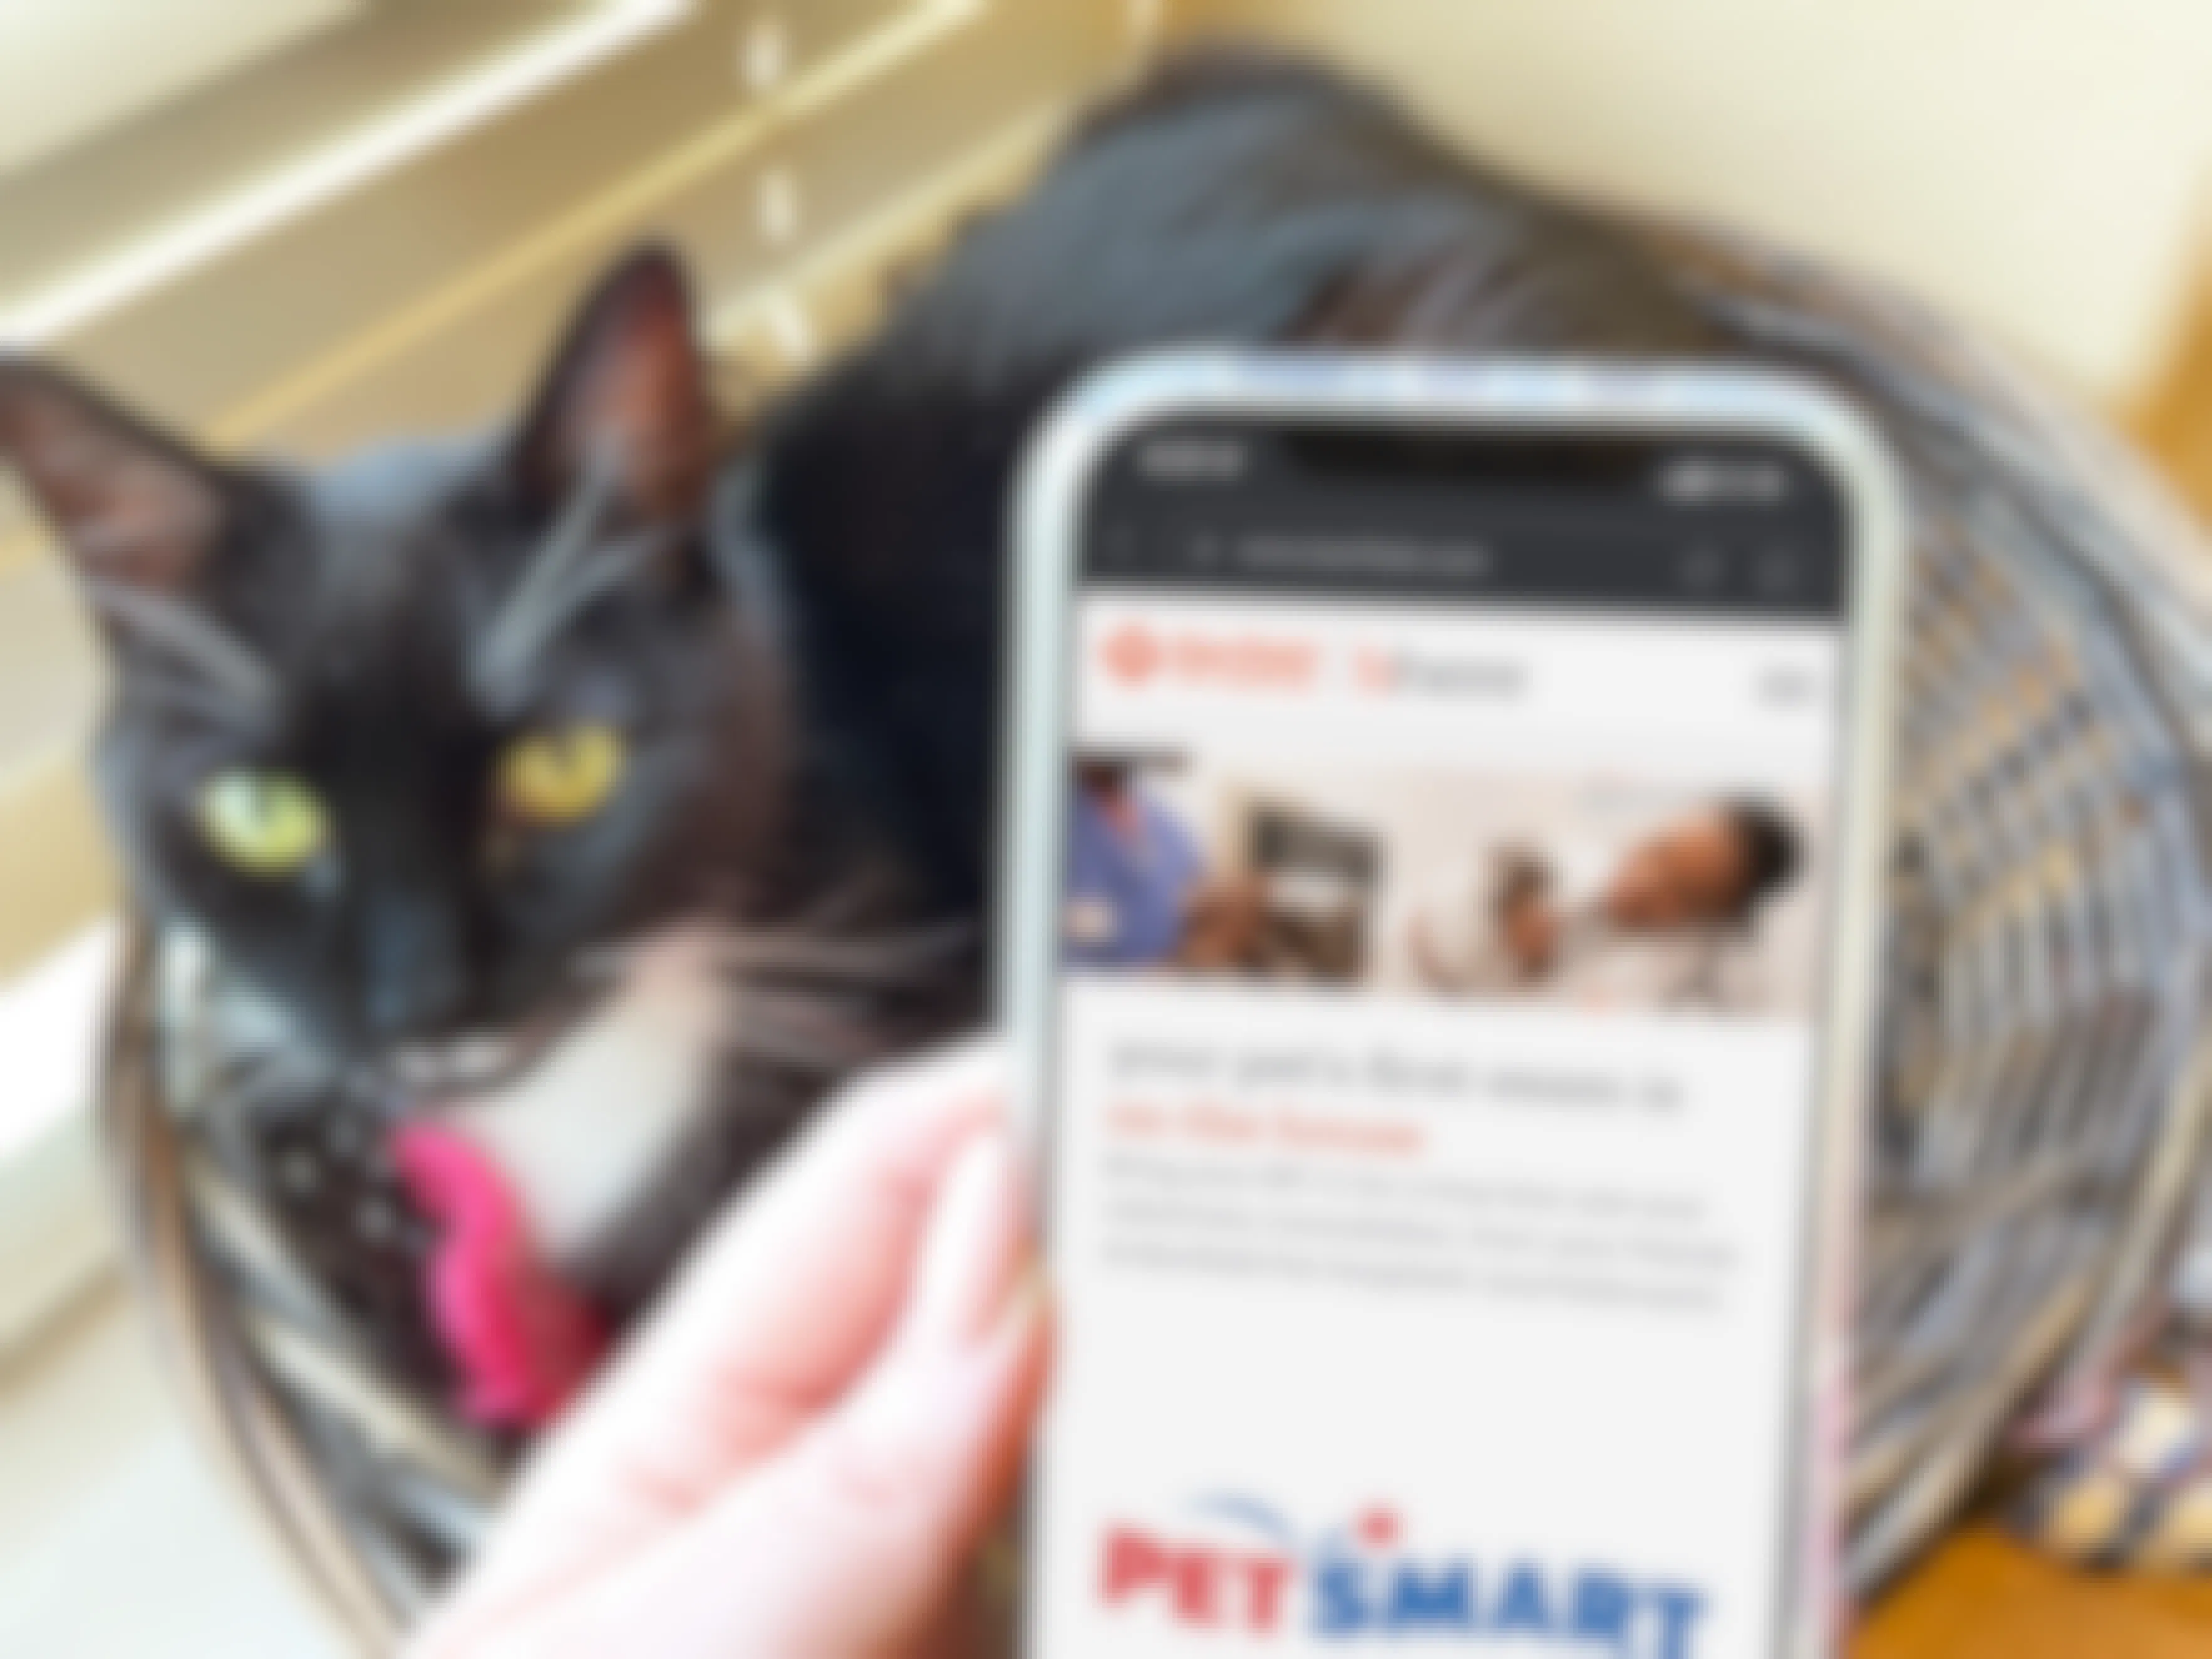 A cellphone displaying the PetSmart website's page about Banfield Pet Hospital's free vet clinic exam being held in front of cat lying in a basket.